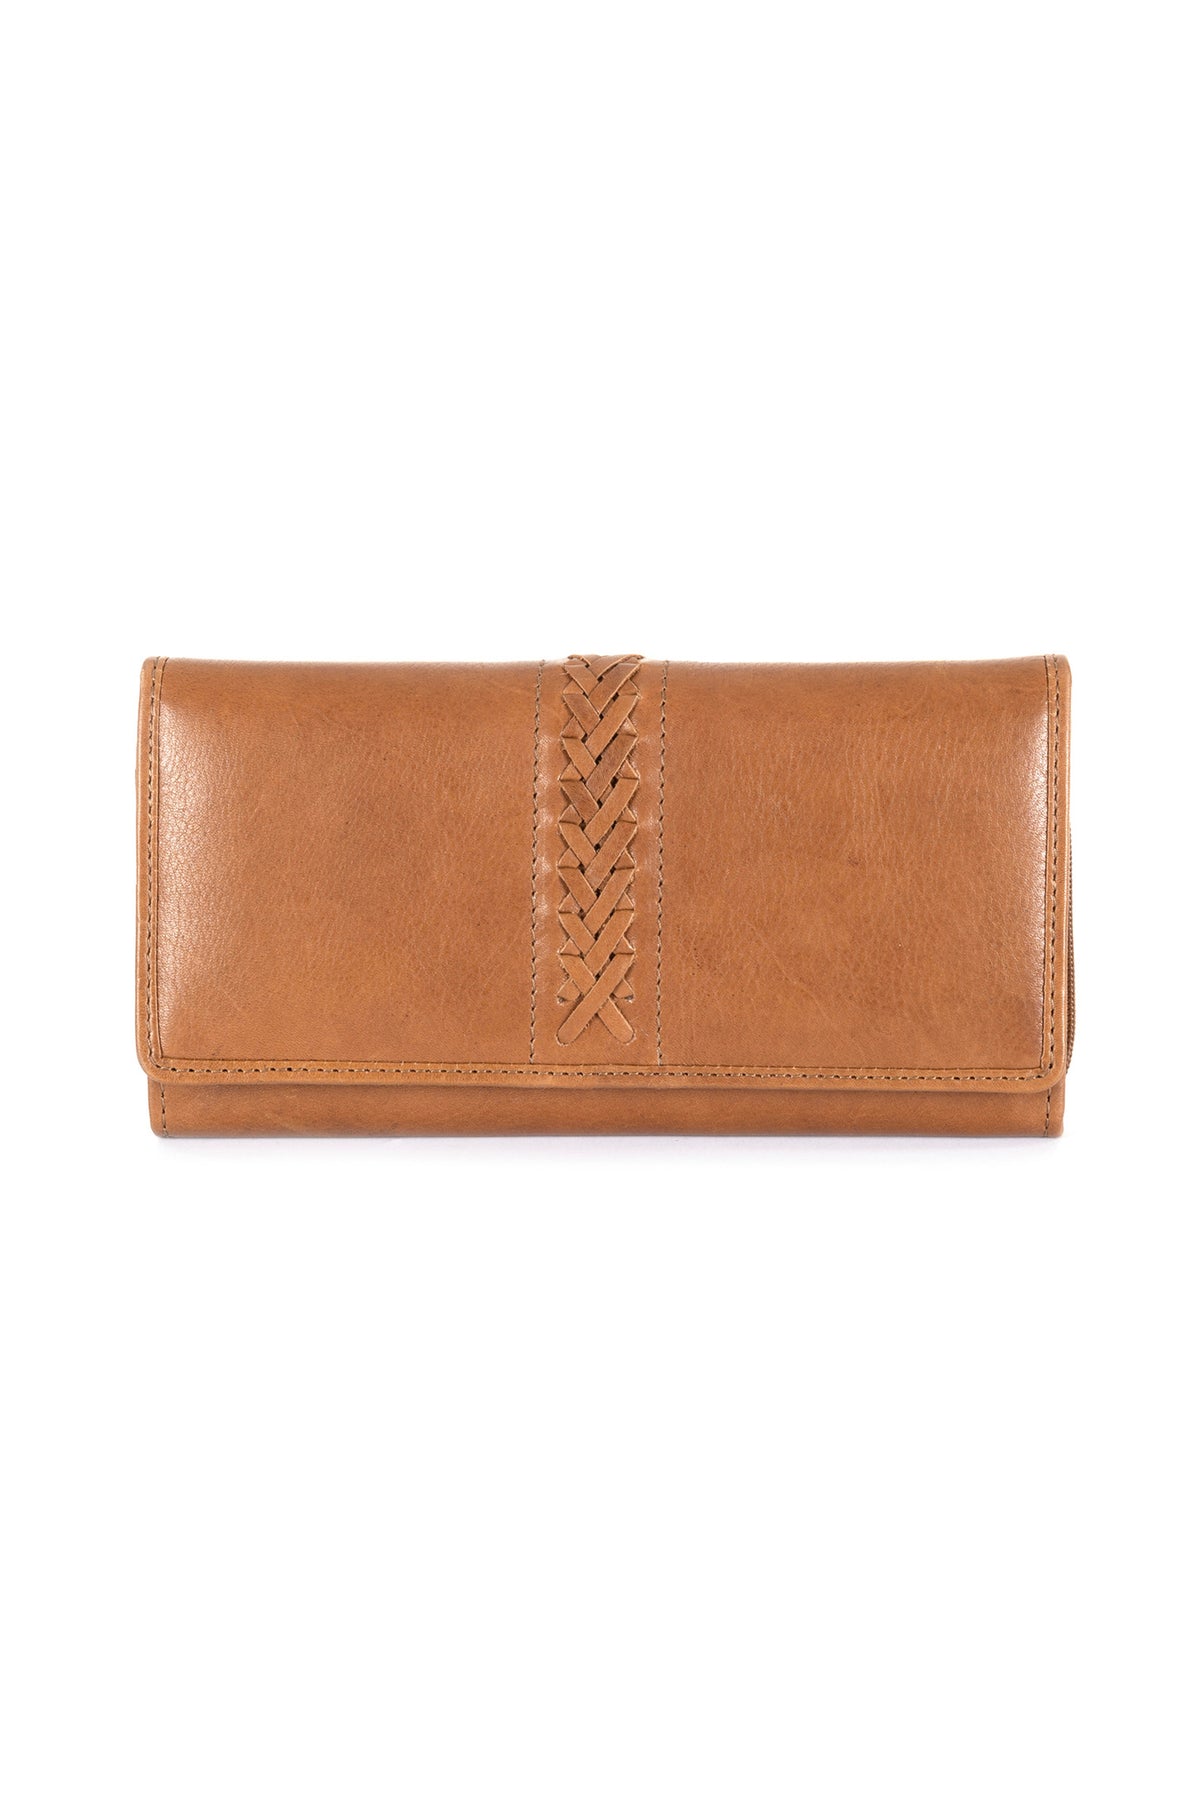 Thomas Cook Lucy wallet - Tan